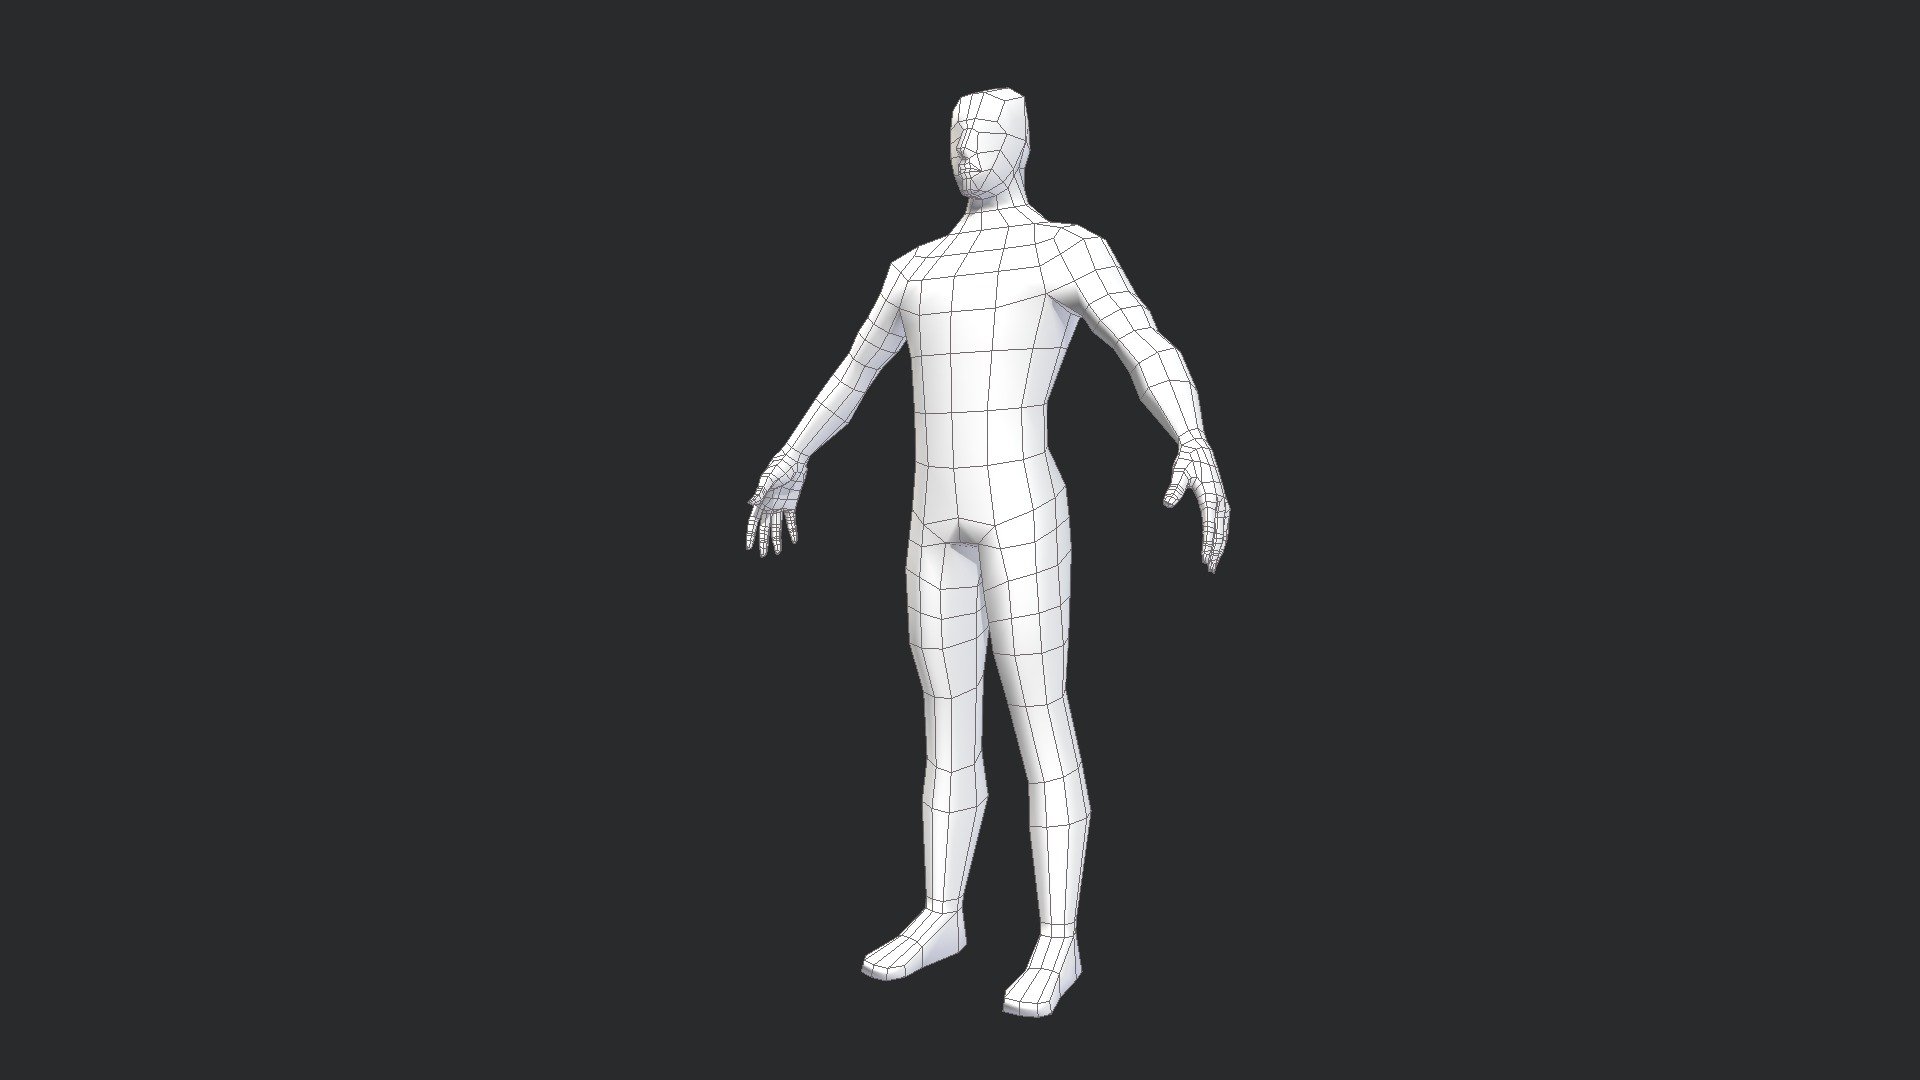 Created as a base for sculting, figured i'd upload it for free to save anyone wanting something similar some time! 

Head - https://creazilla.com/nodes/65527-basic-head-mesh-3d-model
Hands - https://sketchfab.com/3d-models/hand-low-poly-d6c802a74a174c8c805deb20186d1877 - Human Base Mesh Male - Download Free 3D model by WillHenniker94 3d model